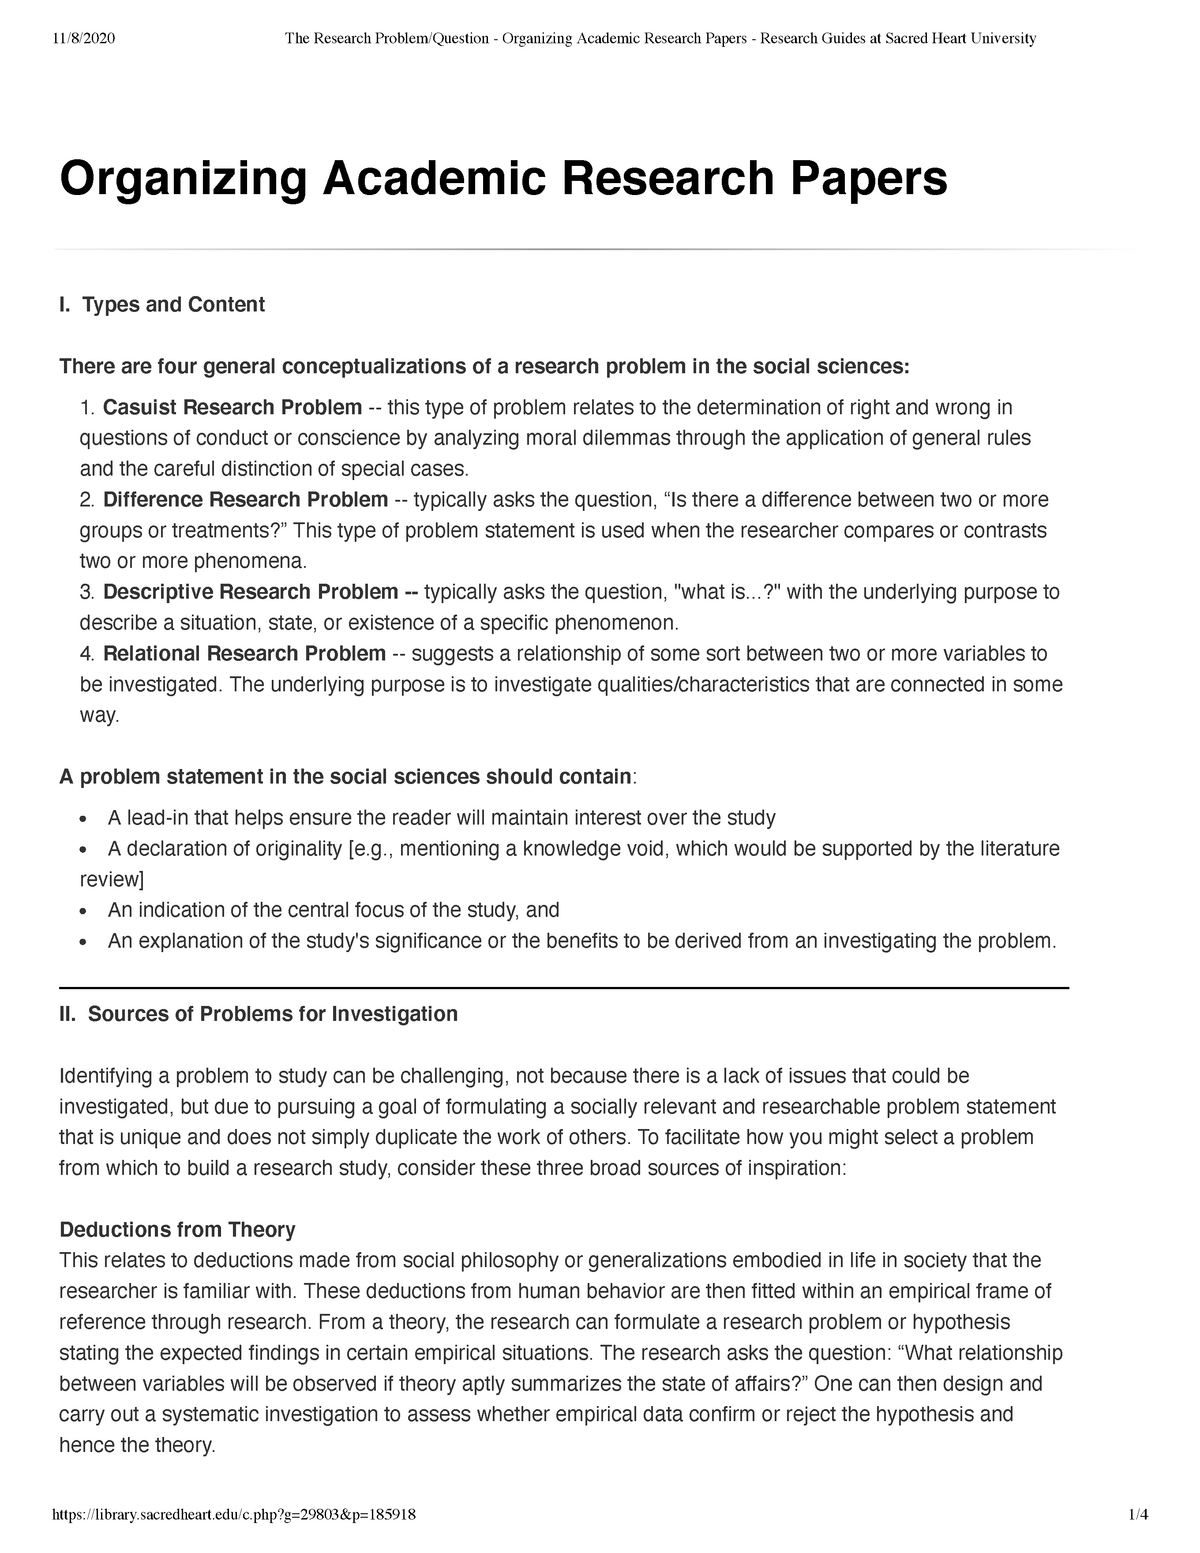 sacred heart university library organizing academic research papers